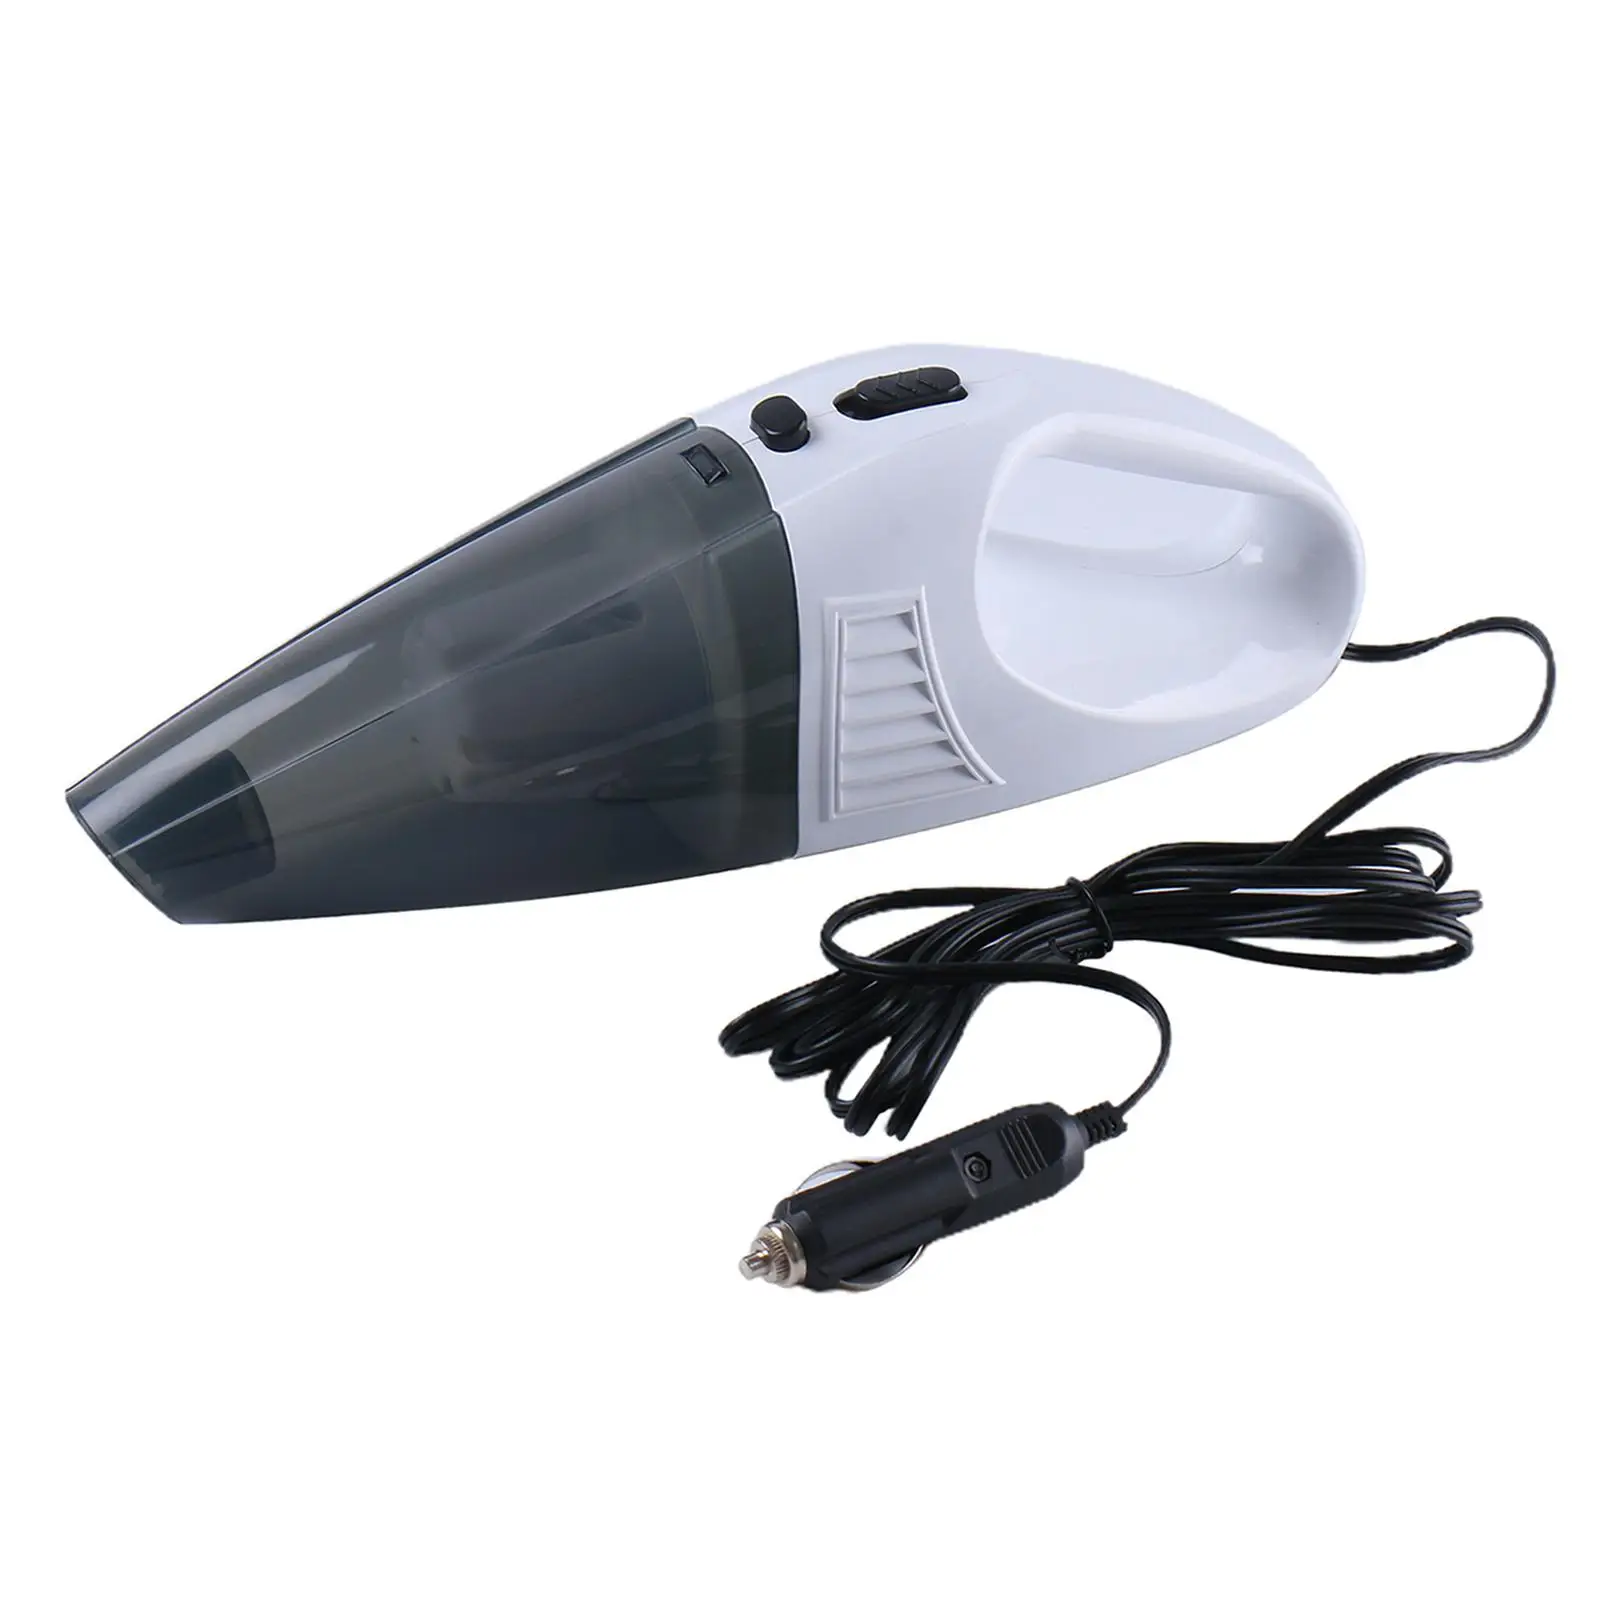  Car Vacuum Cleaner for Car Interior Detailing Cleaning with